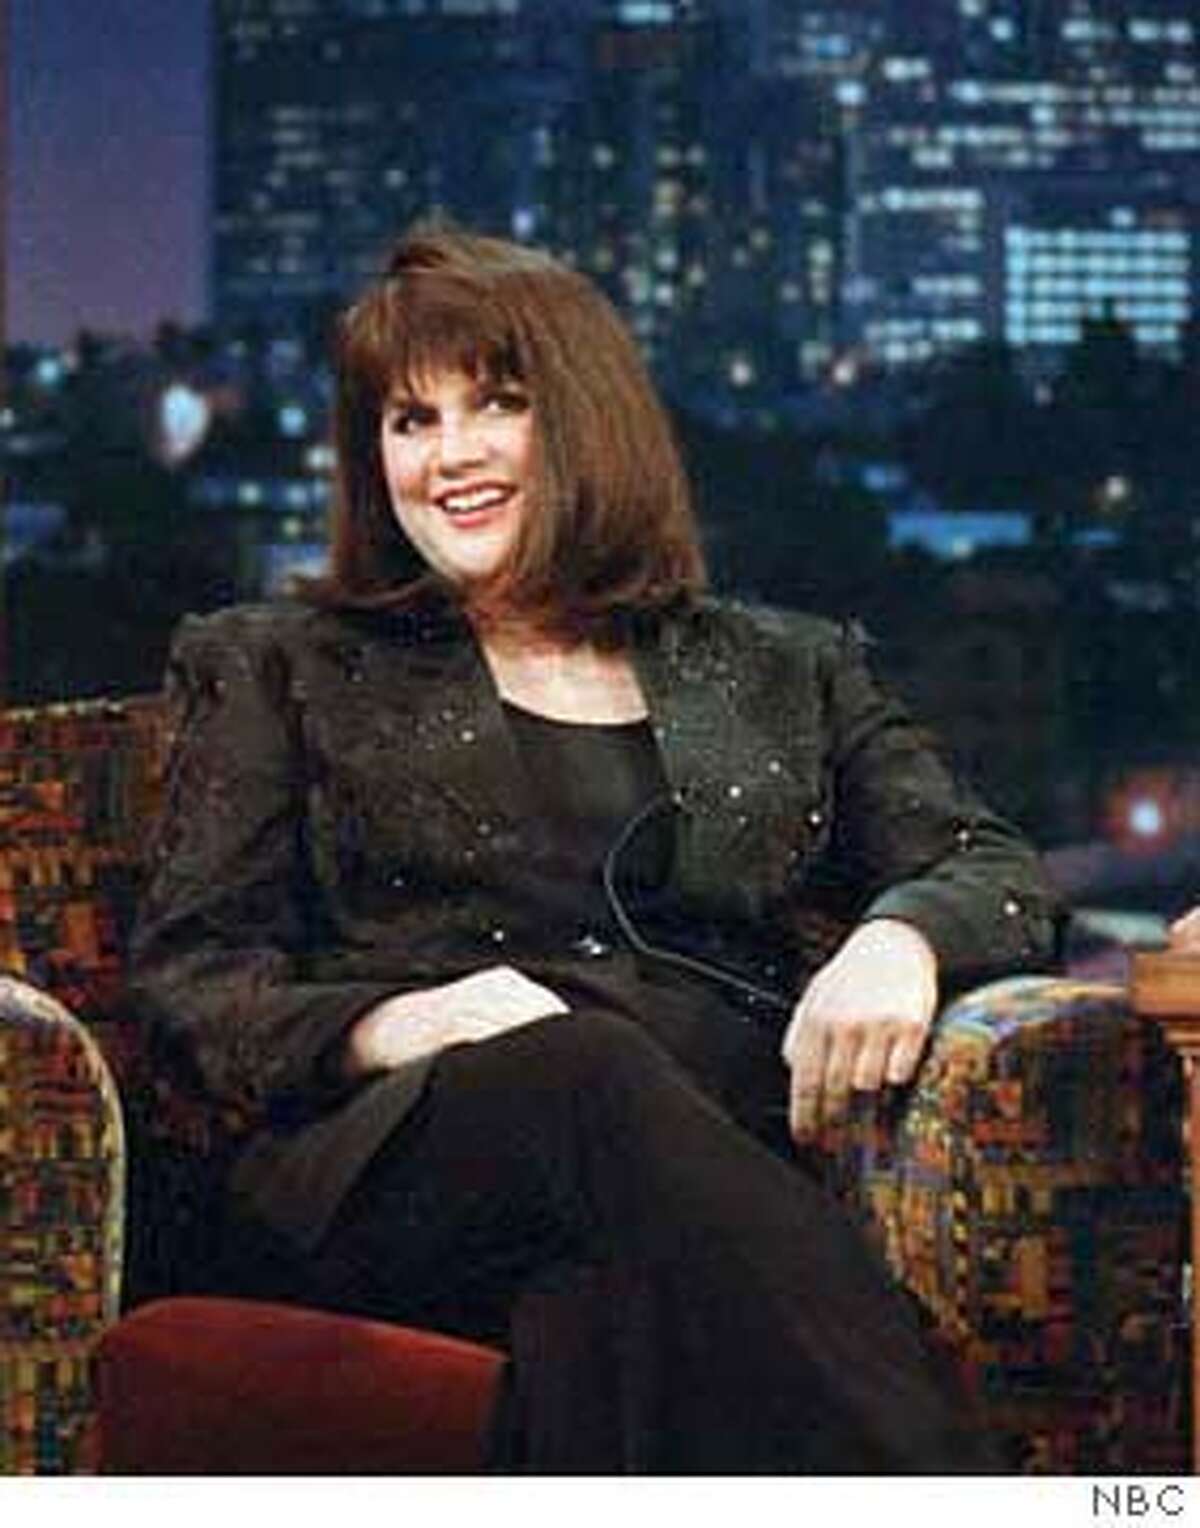 Robin Quivers, left, sidekick deejay of radio personality Howard Stern, verbally spars with Linda Ronstadt during an appearance on "The Tonight Show with Jay Leno" on Thursday, April 27, 1995, in Burbank, Calif. Ronstadt says Stern takes advantage of Quivers. (AP Photo, NBC) ALSO RAN 7/22/02 CAT